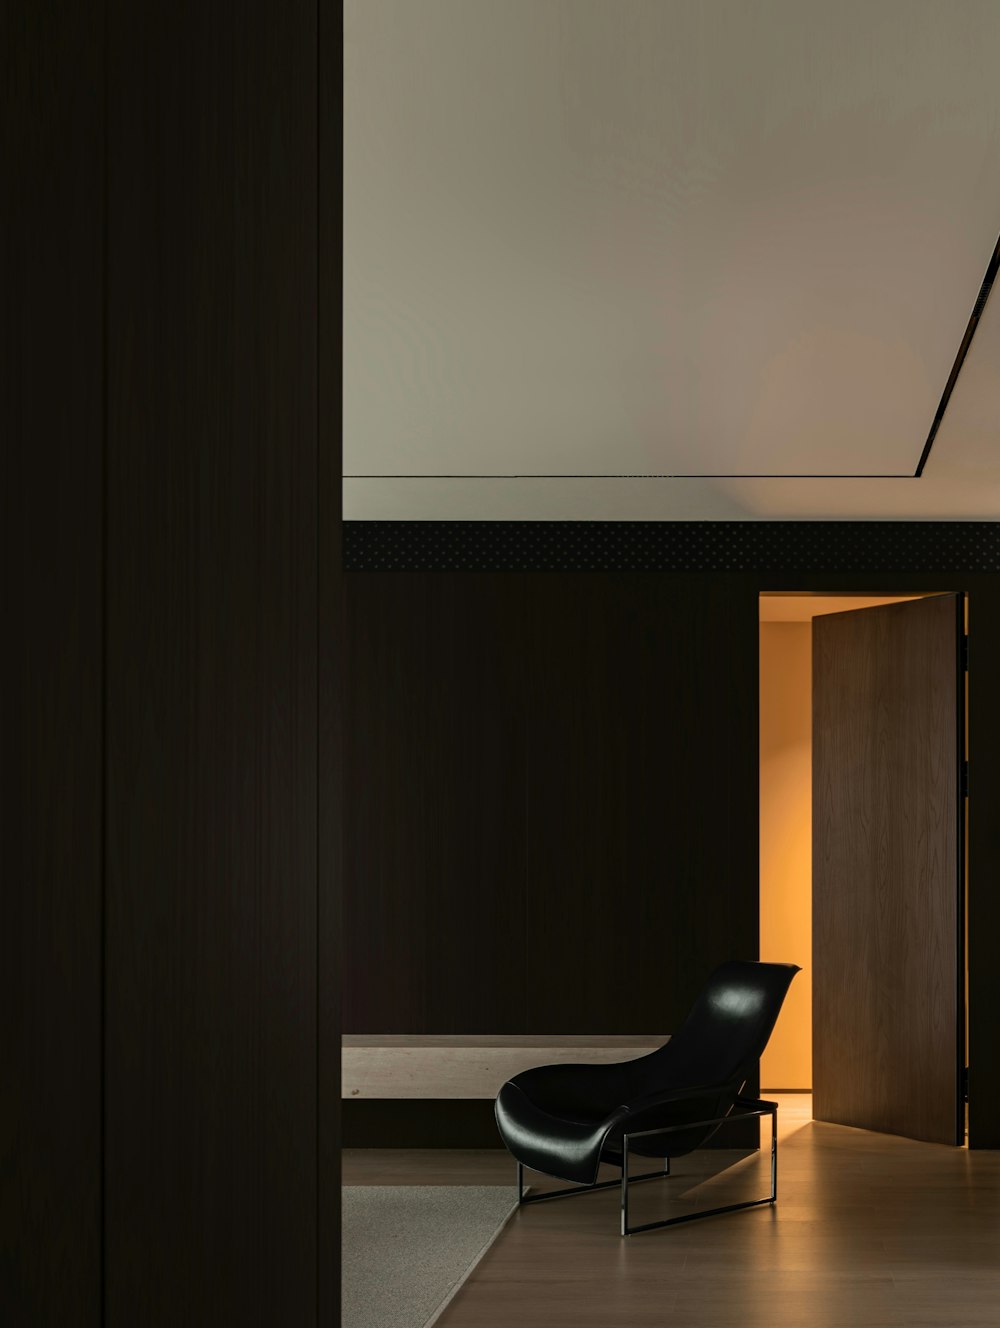 a black chair sitting in a room next to a doorway